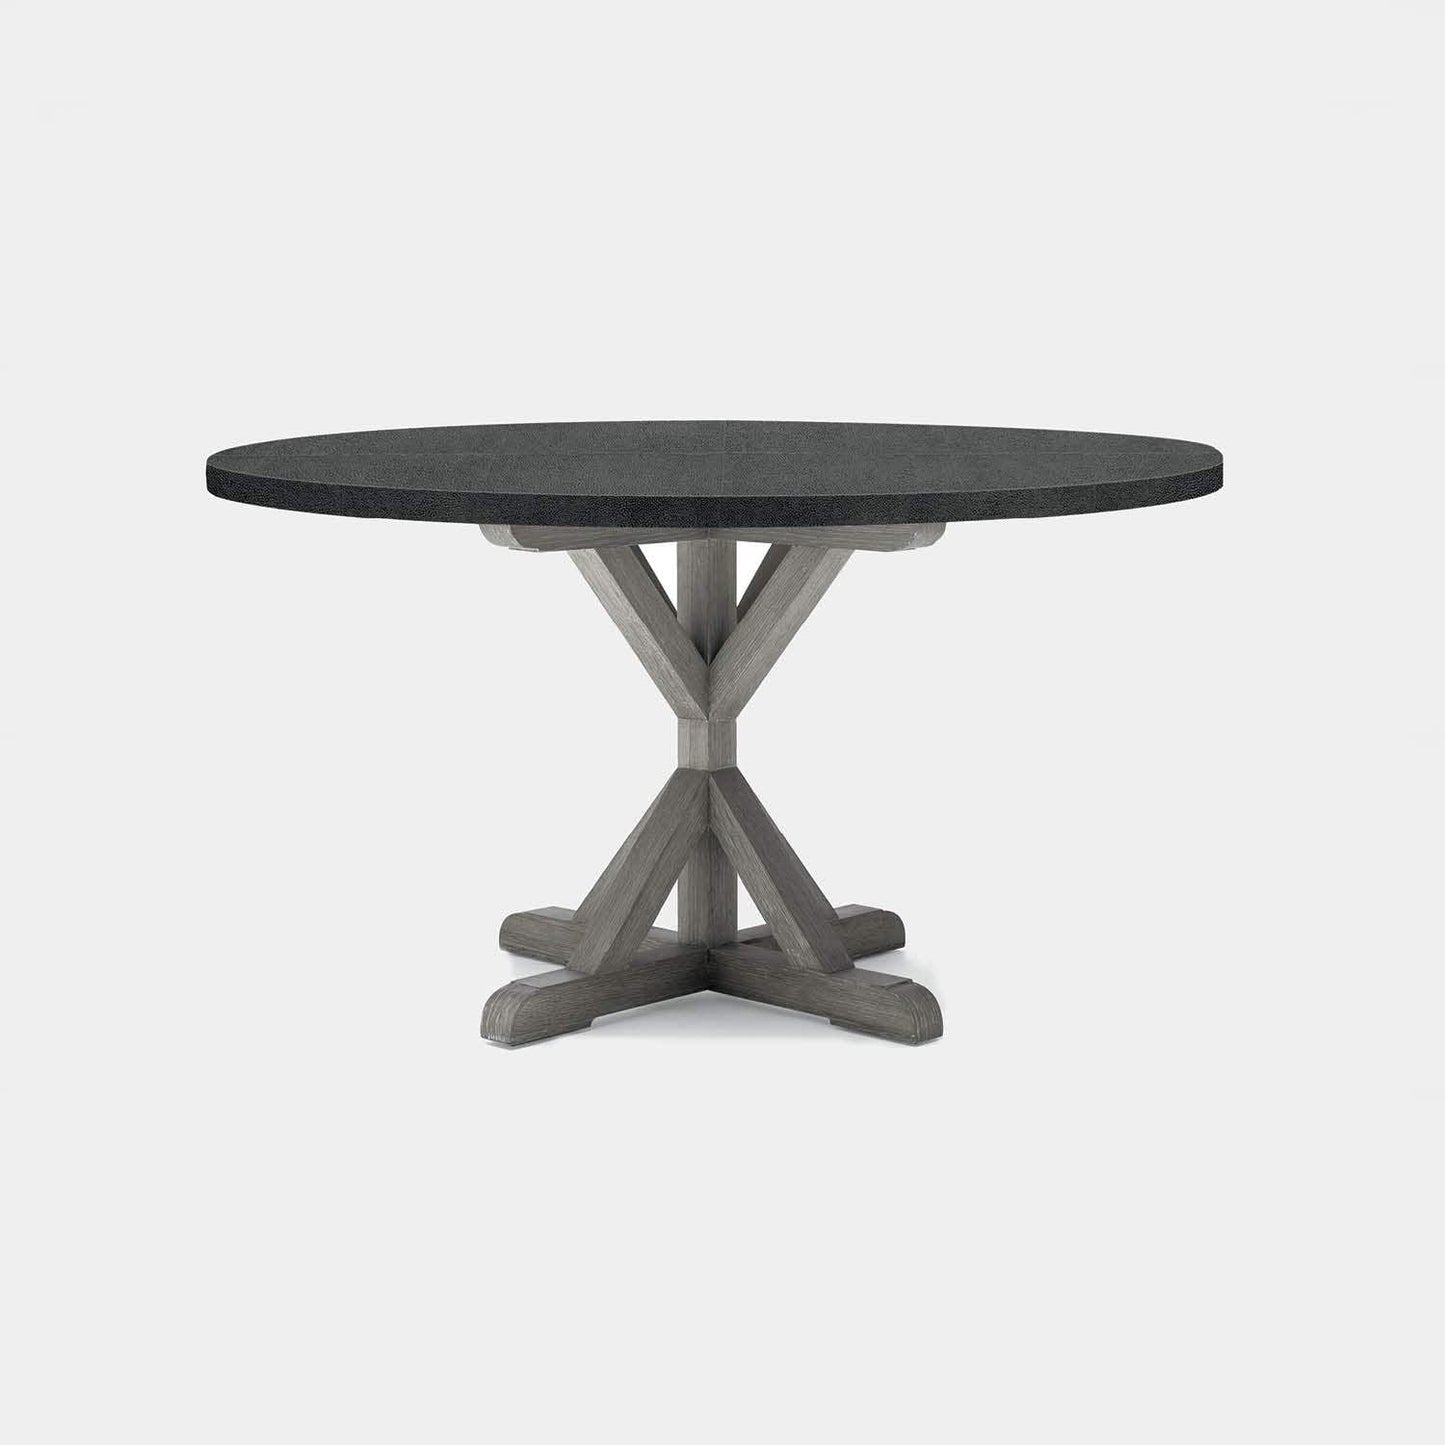 Made Goods Dane 48" x 30" Gray Cerused Oak Dinning Table With Round Black Vintage Faux Shagreen Table Top